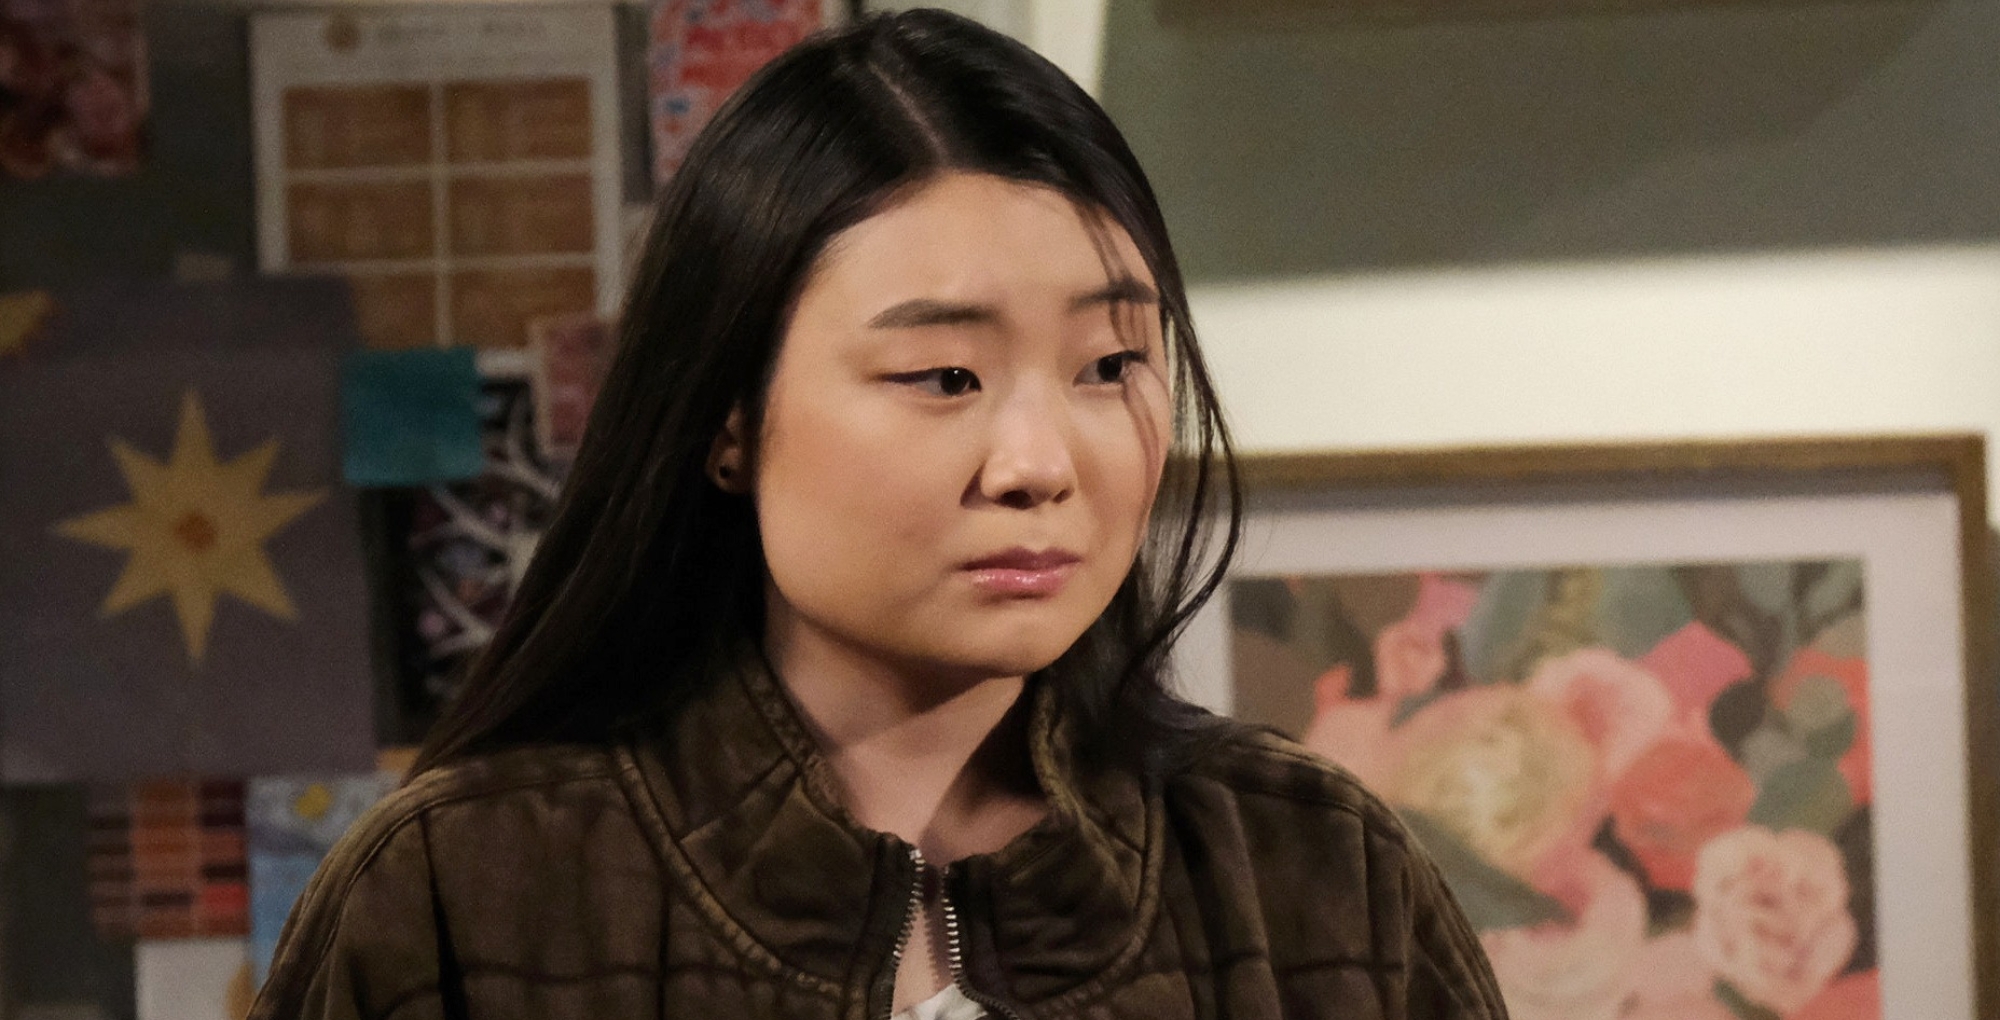 days of our lives spoilers for february 13, 2023 show a sad wendy shin